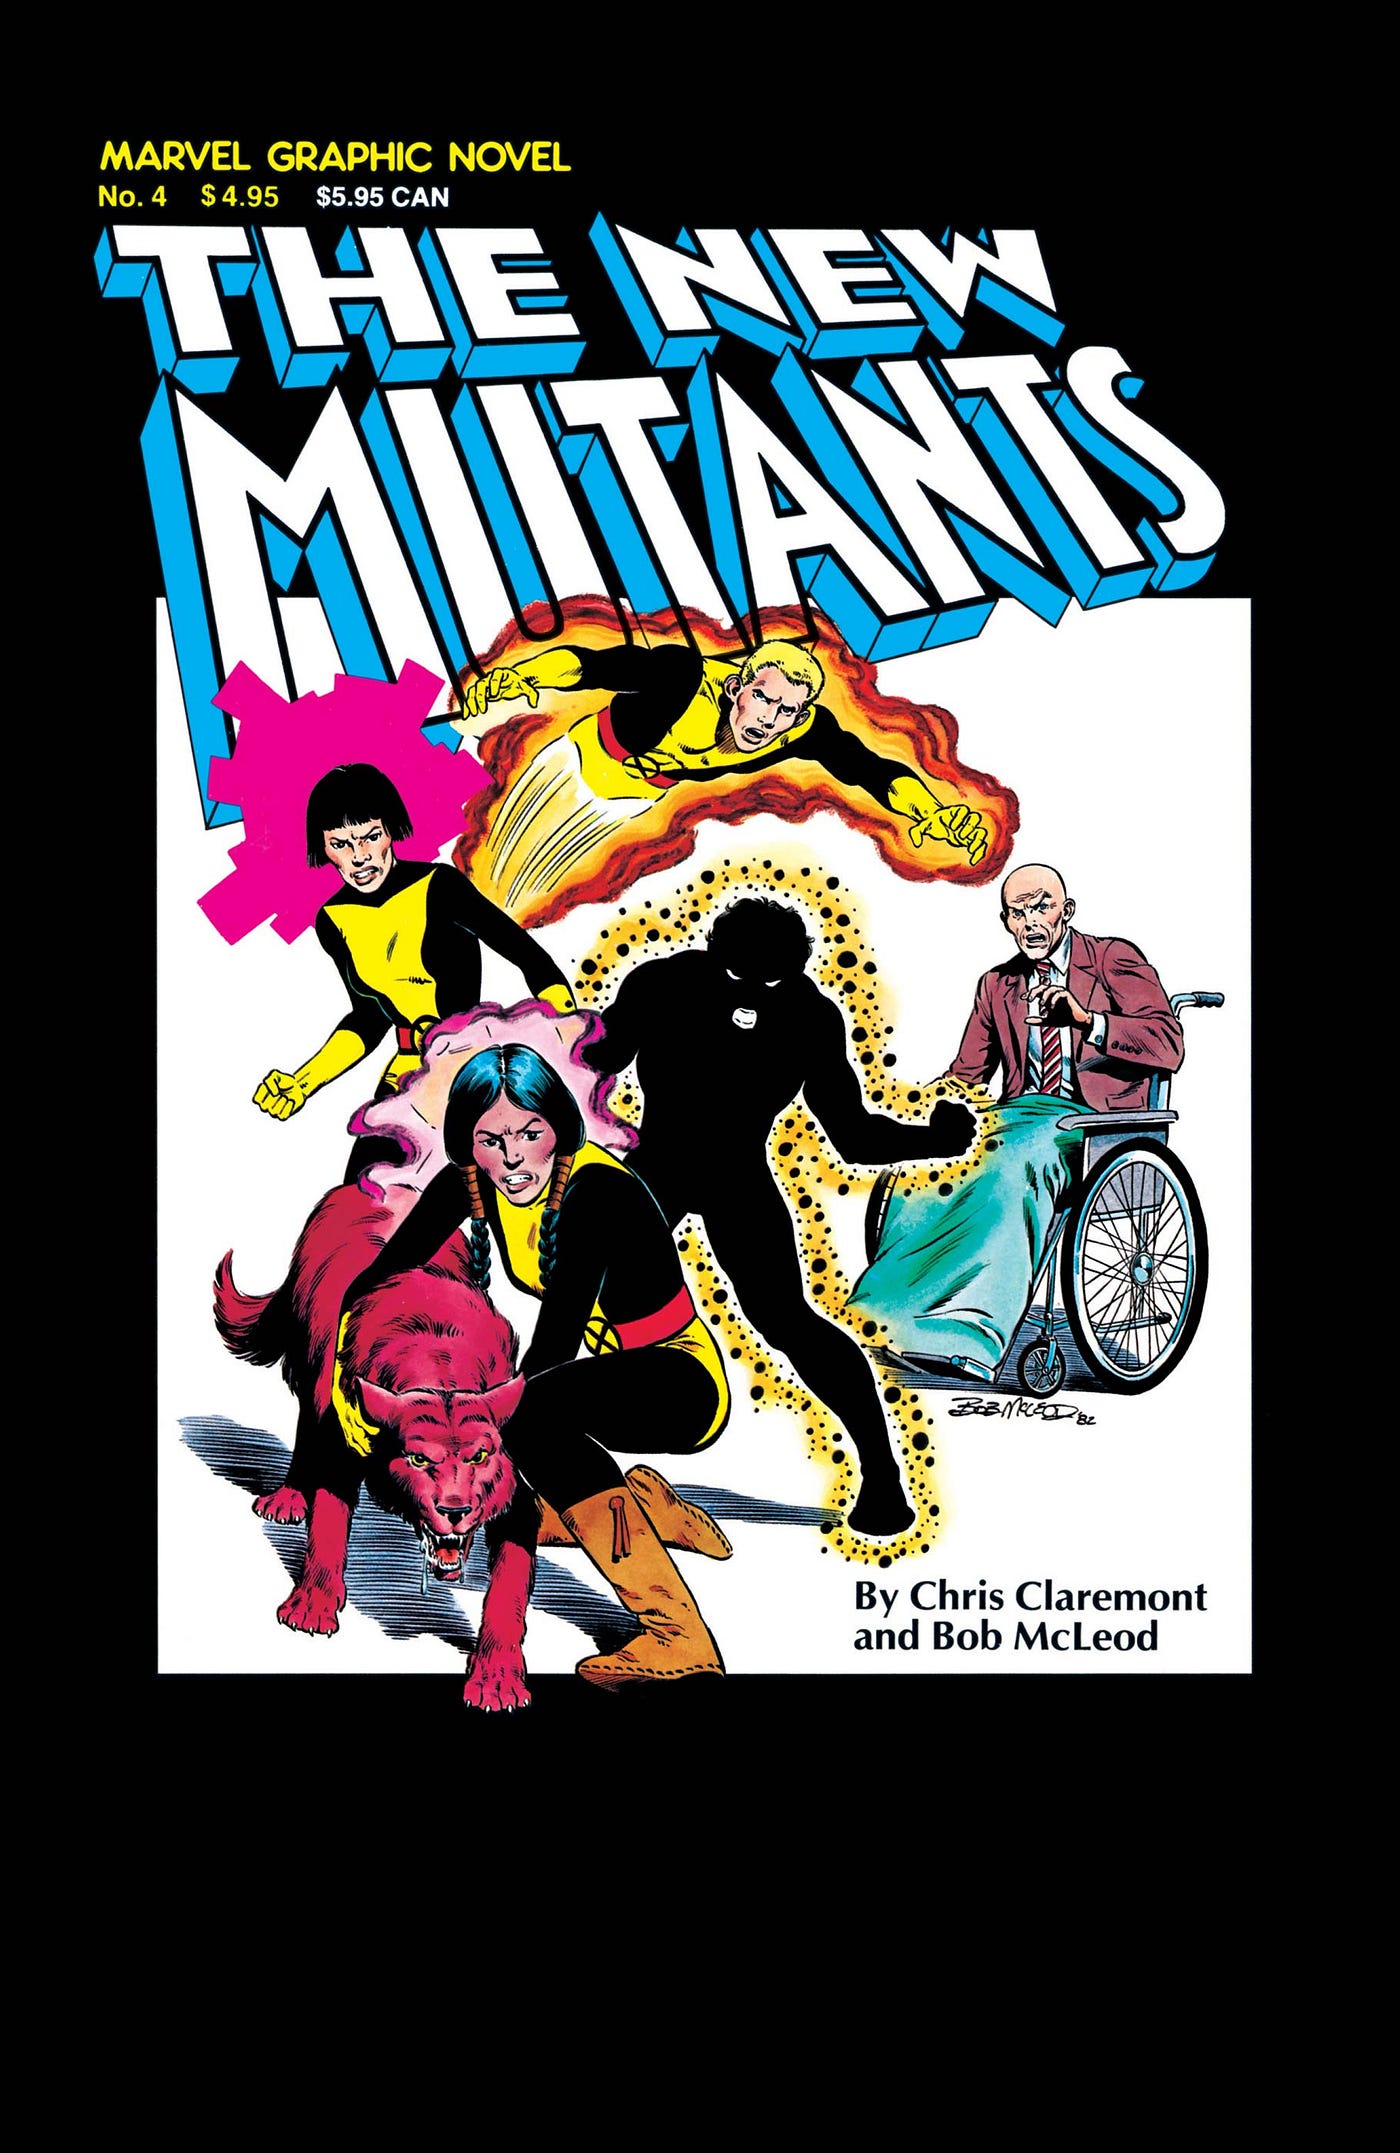 Well, I Finally Watched The New Mutants. . ., by Devin Whitlock